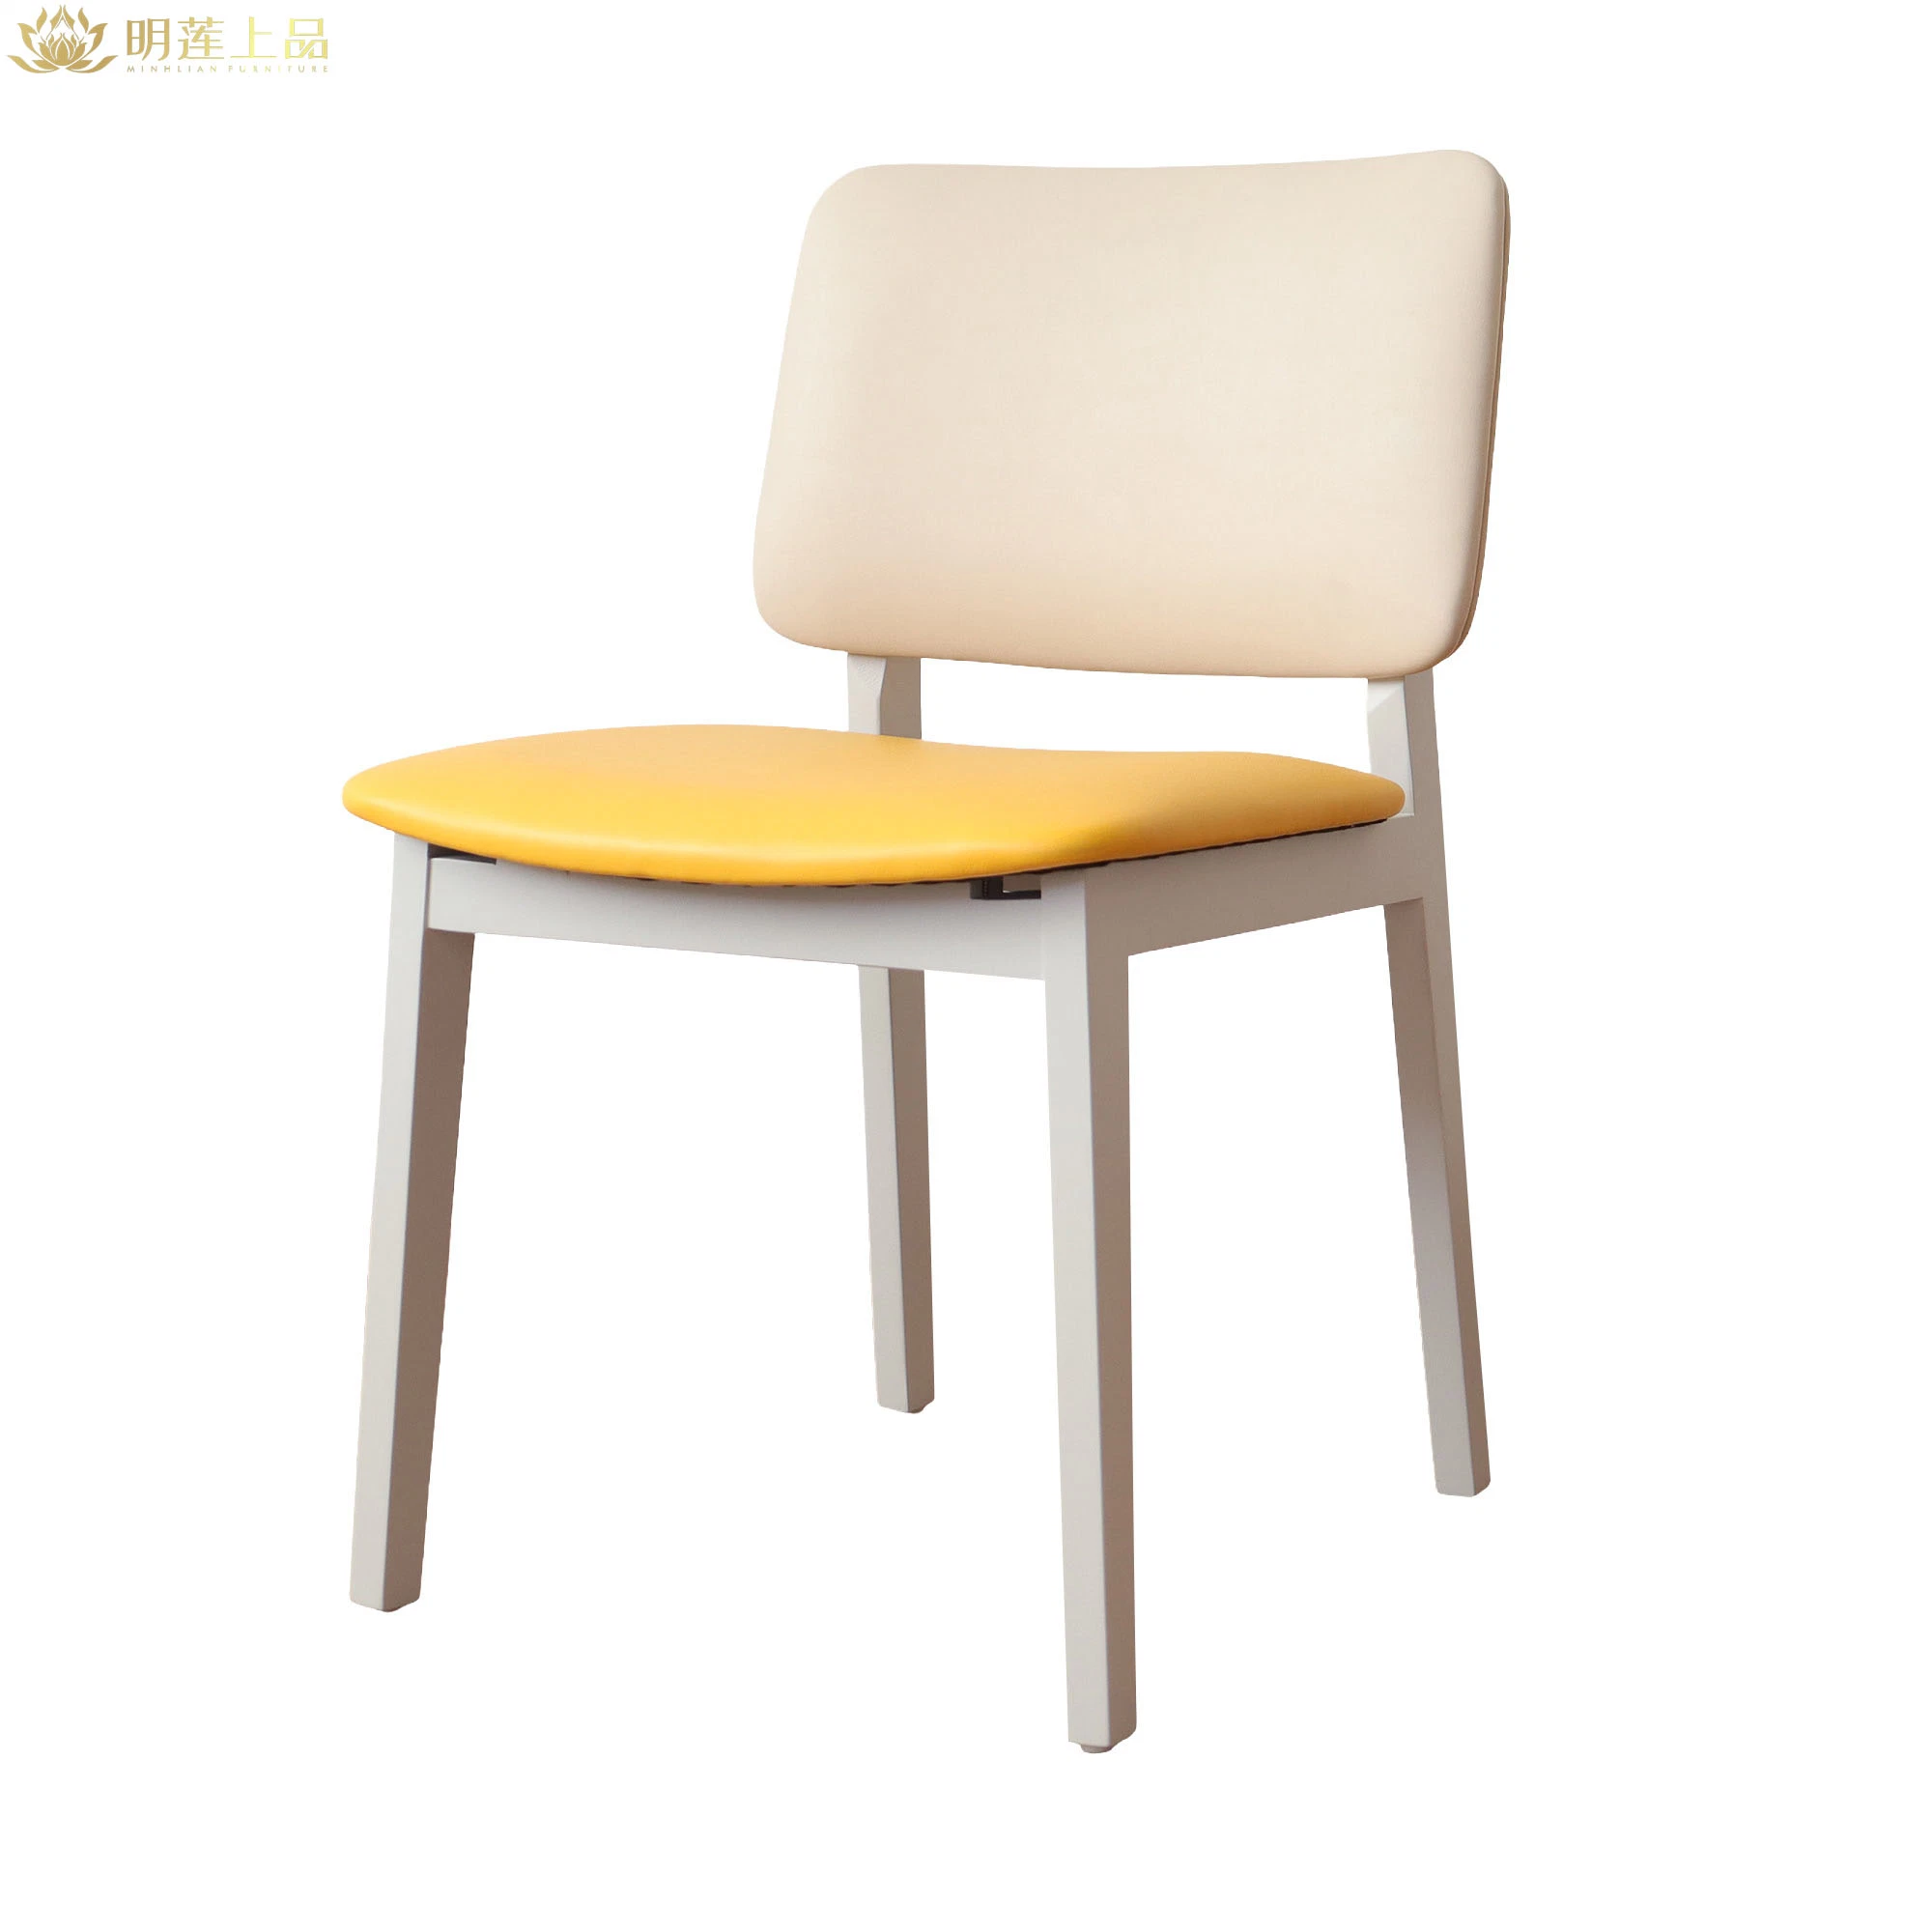 Modern Design Solid Wood Restaurant Chair Yellow PU Leather Upholstered Dining Room Furniture Restaurant Furniture Home Furniture Cafe Wooden Chair